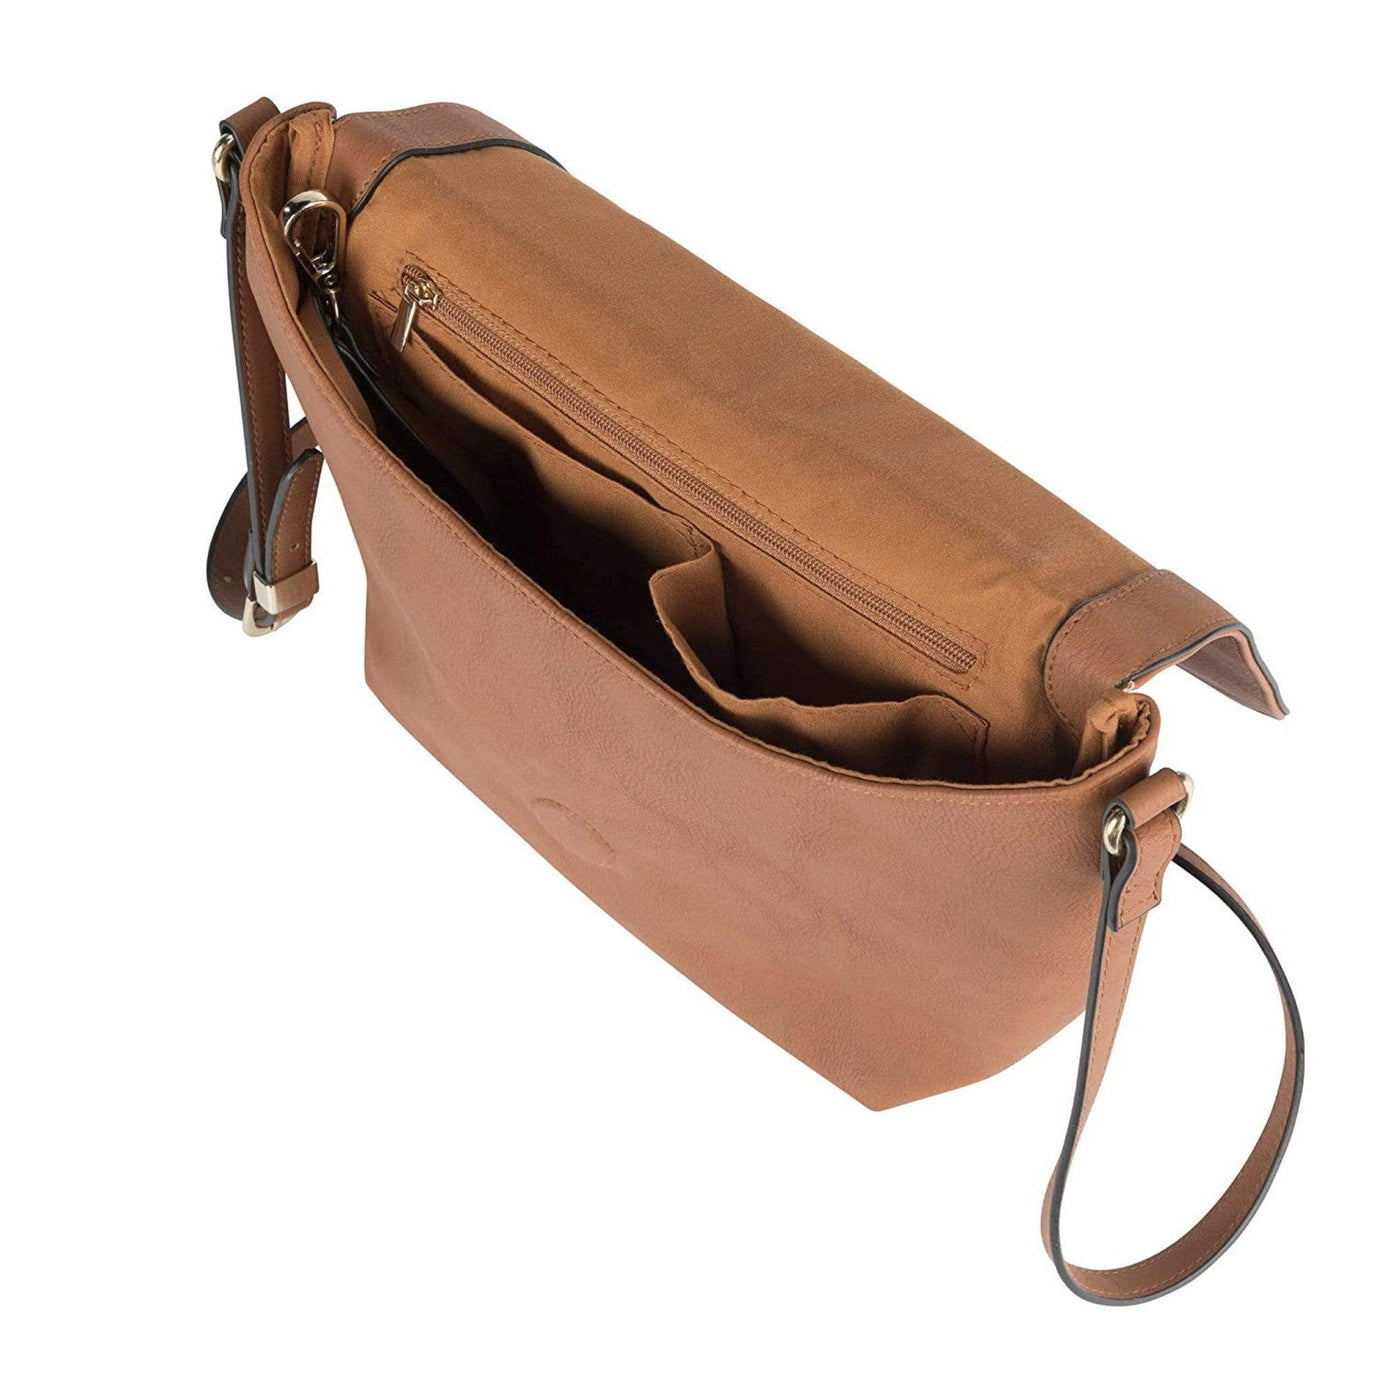 Concealed Carry Sierra Flap Crossbody Purse by Browning